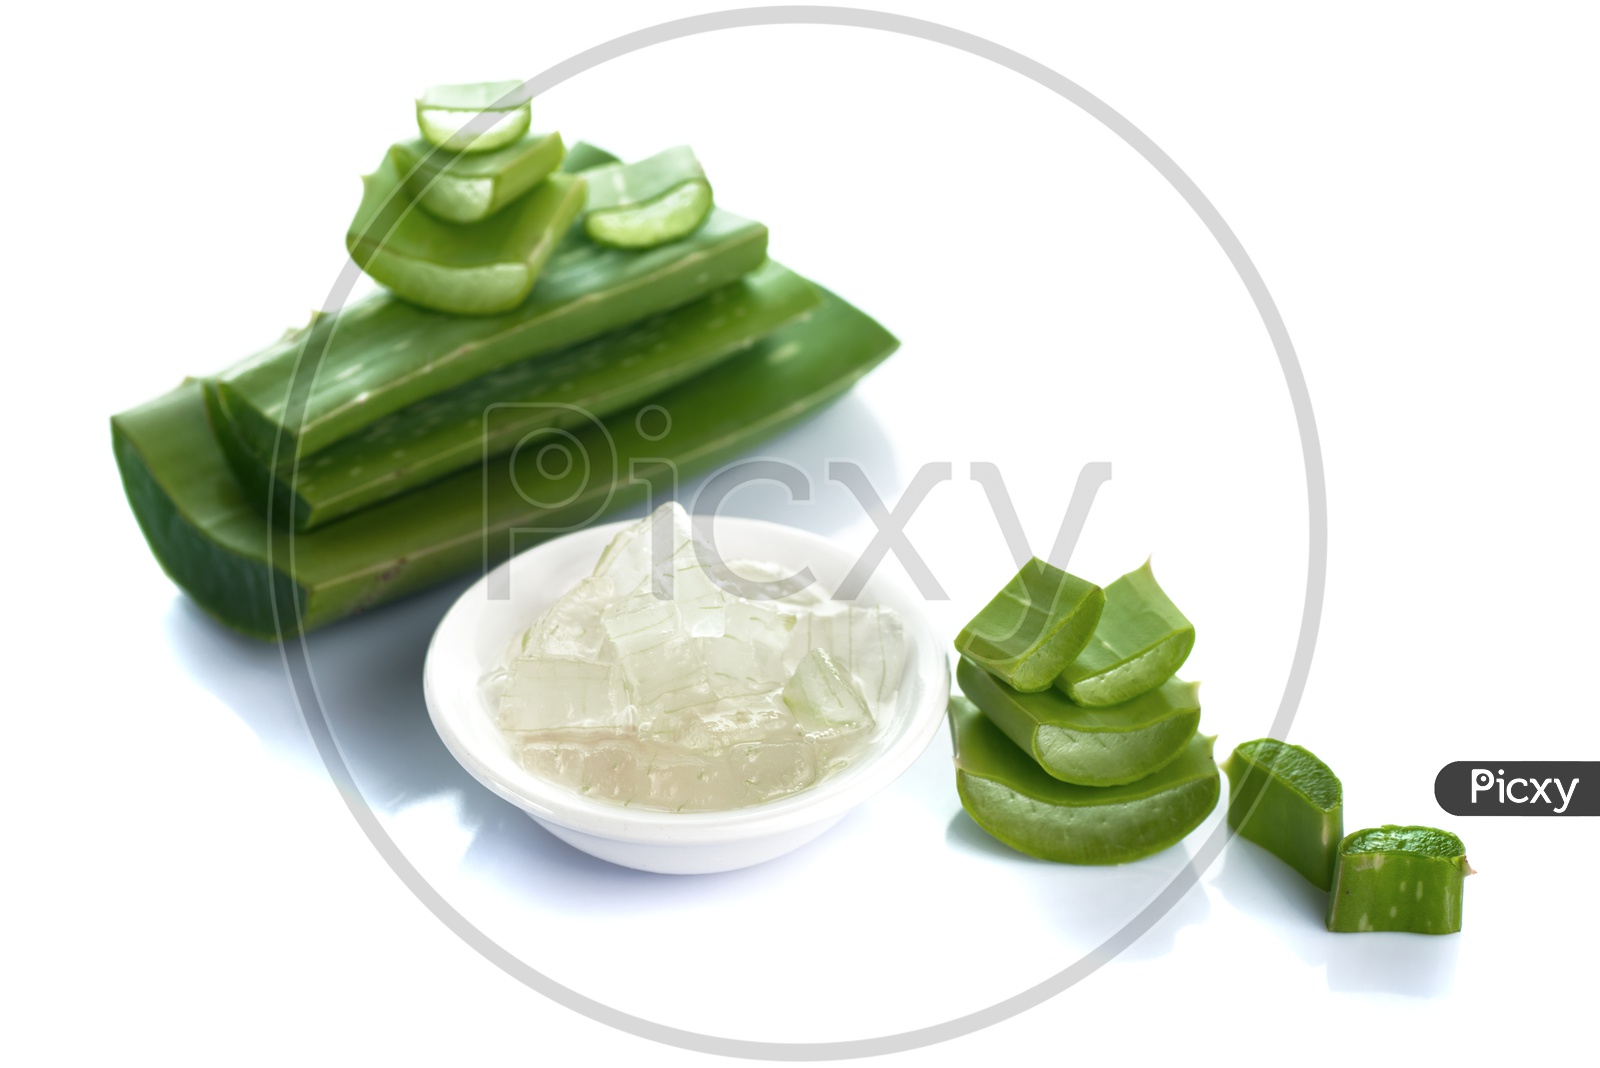 Extracted Aloe Vera Gel In an White Bowl Along With Aloe Vera Pieces on an Isolated White Background